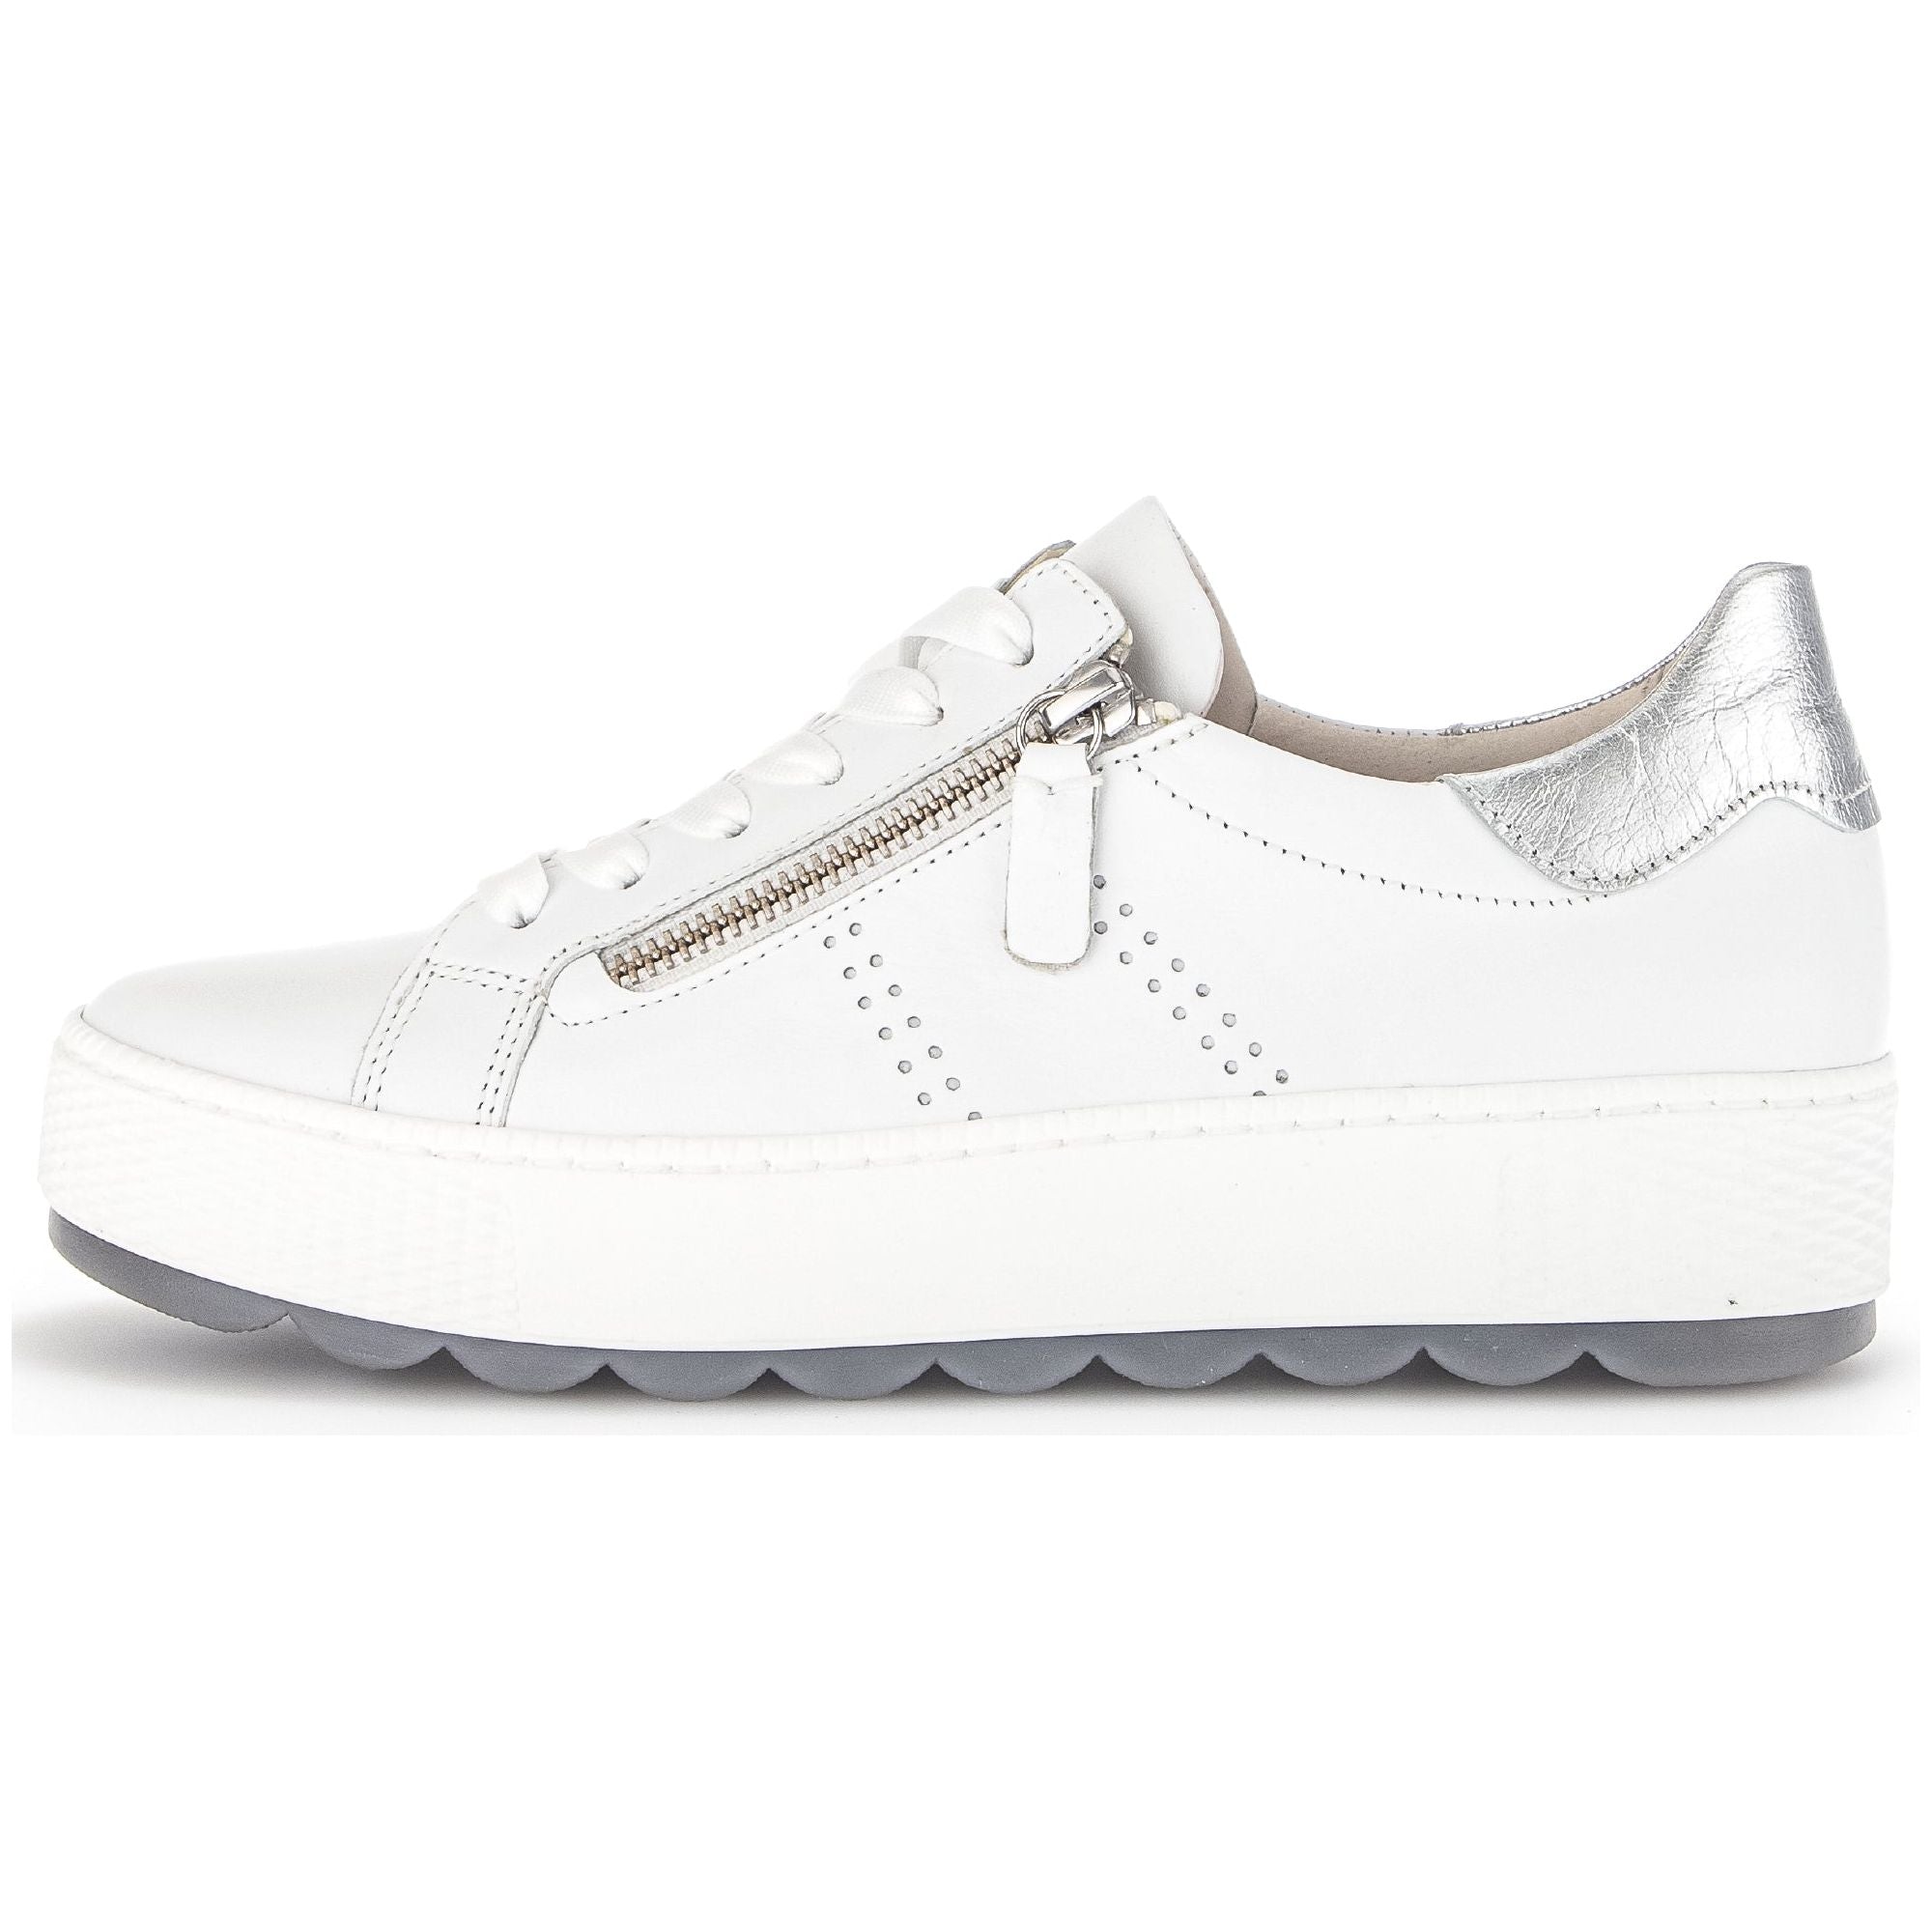 Gabor Quench (46.058.50)- Ladies Lace Trainer with Side Zip in White.&nbsp;Gabor Shoes | Ladies Shoes | Wisemans Bantry | Shoe Shop | West Cork | Munster | Ireland